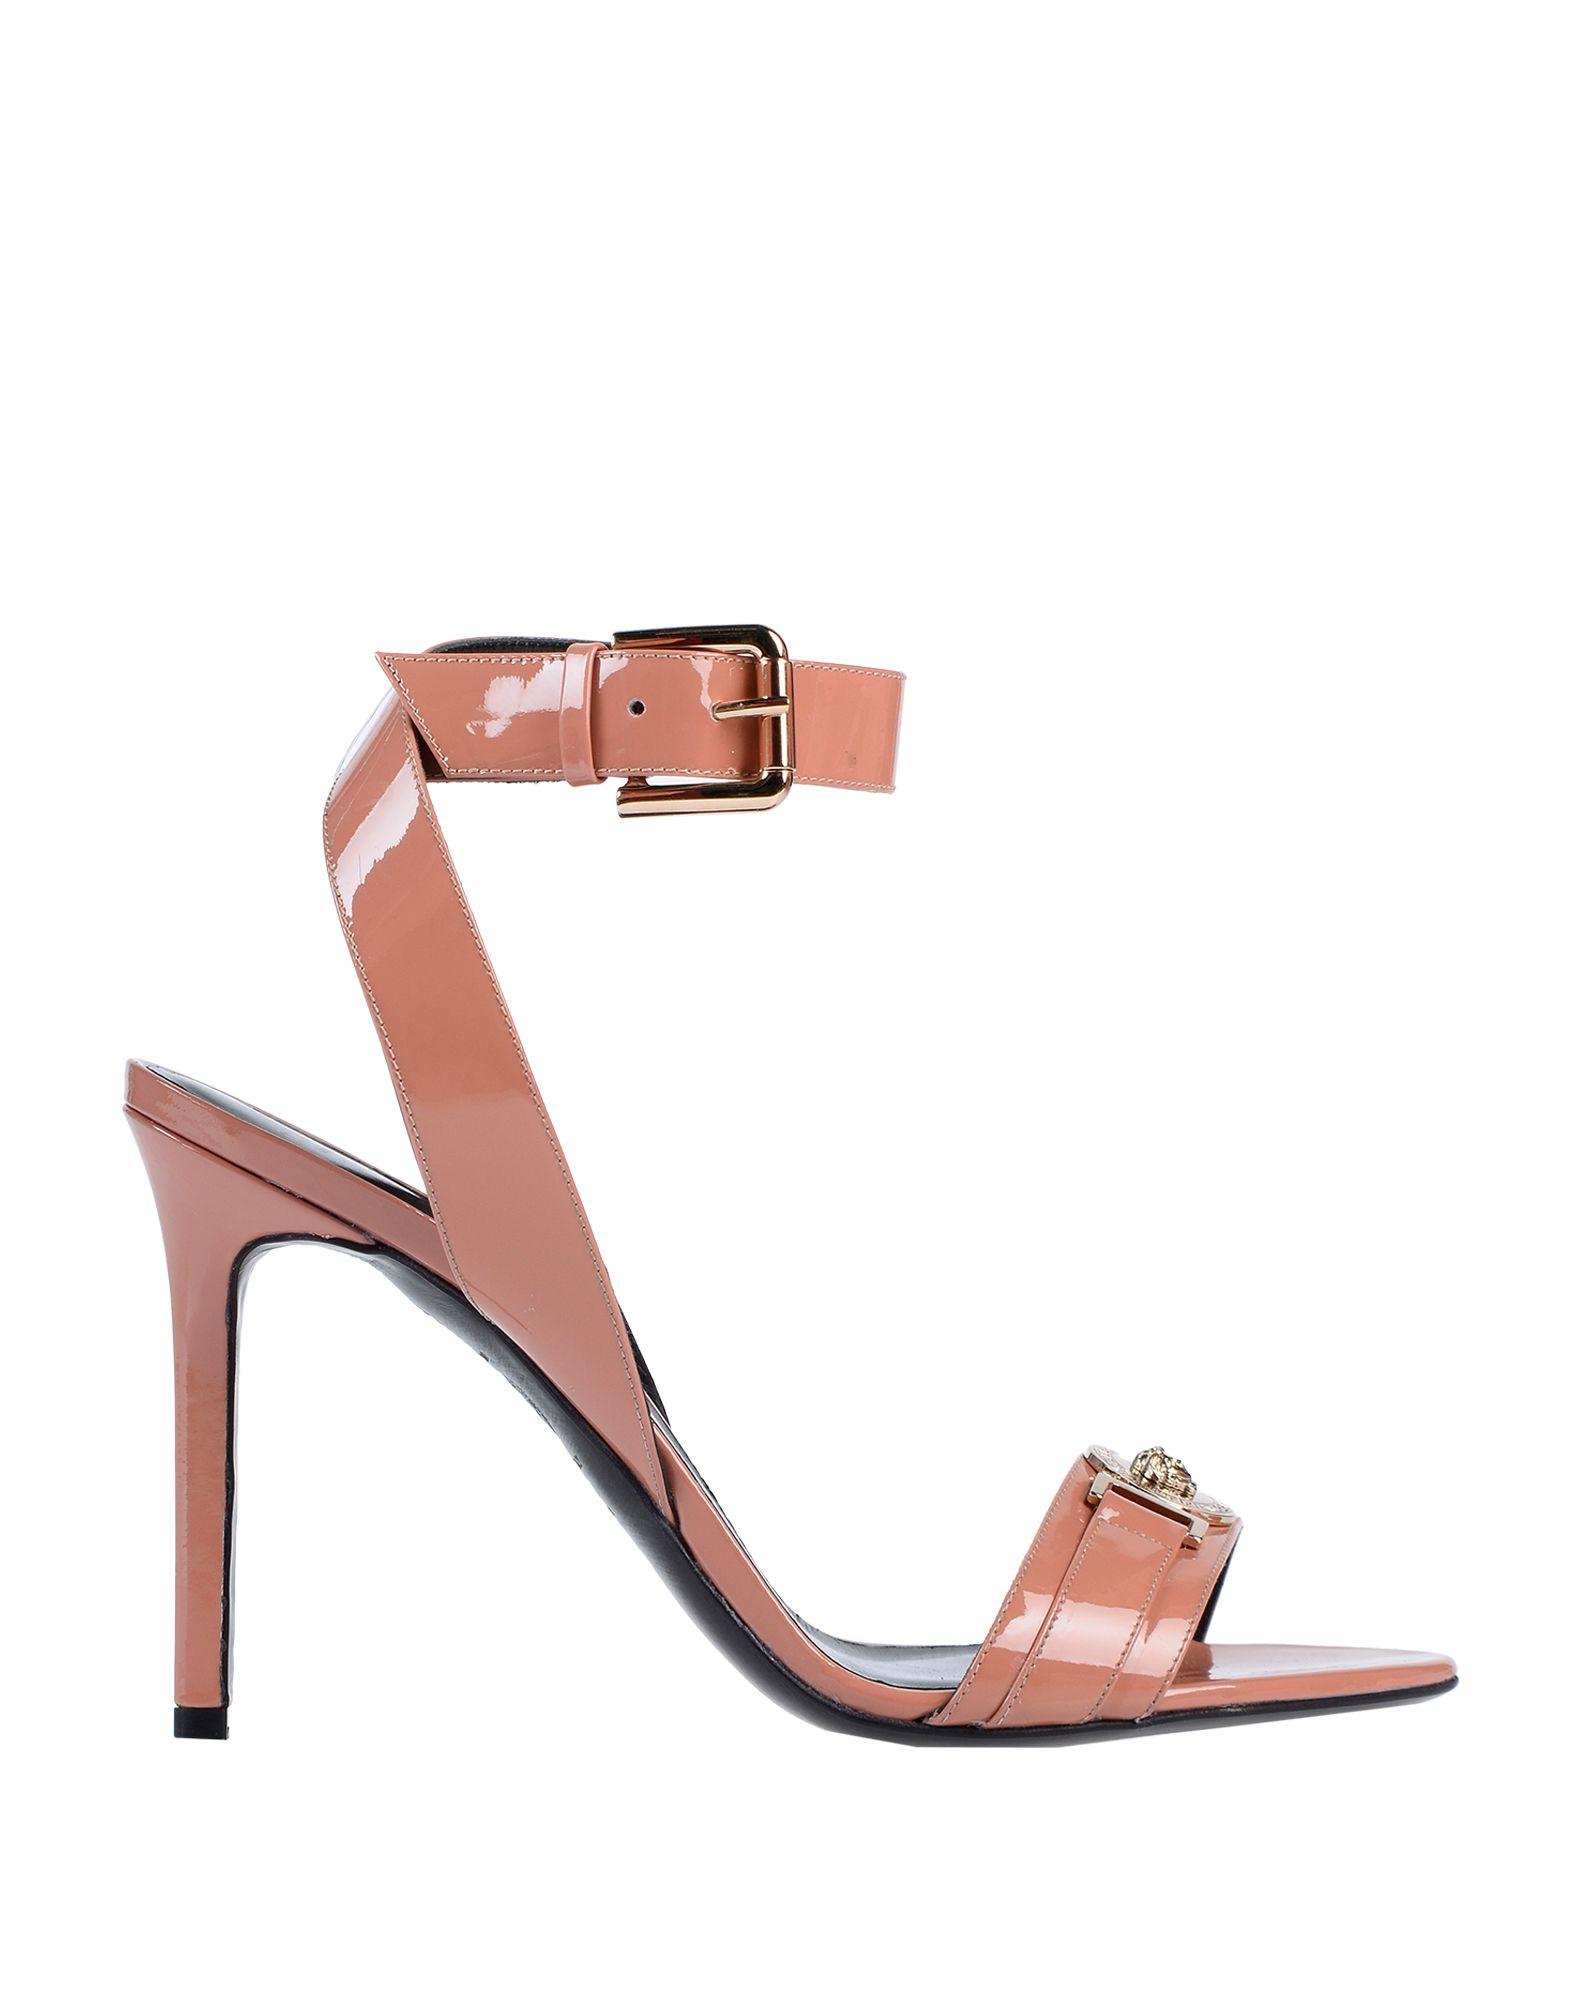 Versace Leather Sandals in Pastel Pink (Pink) - Lyst